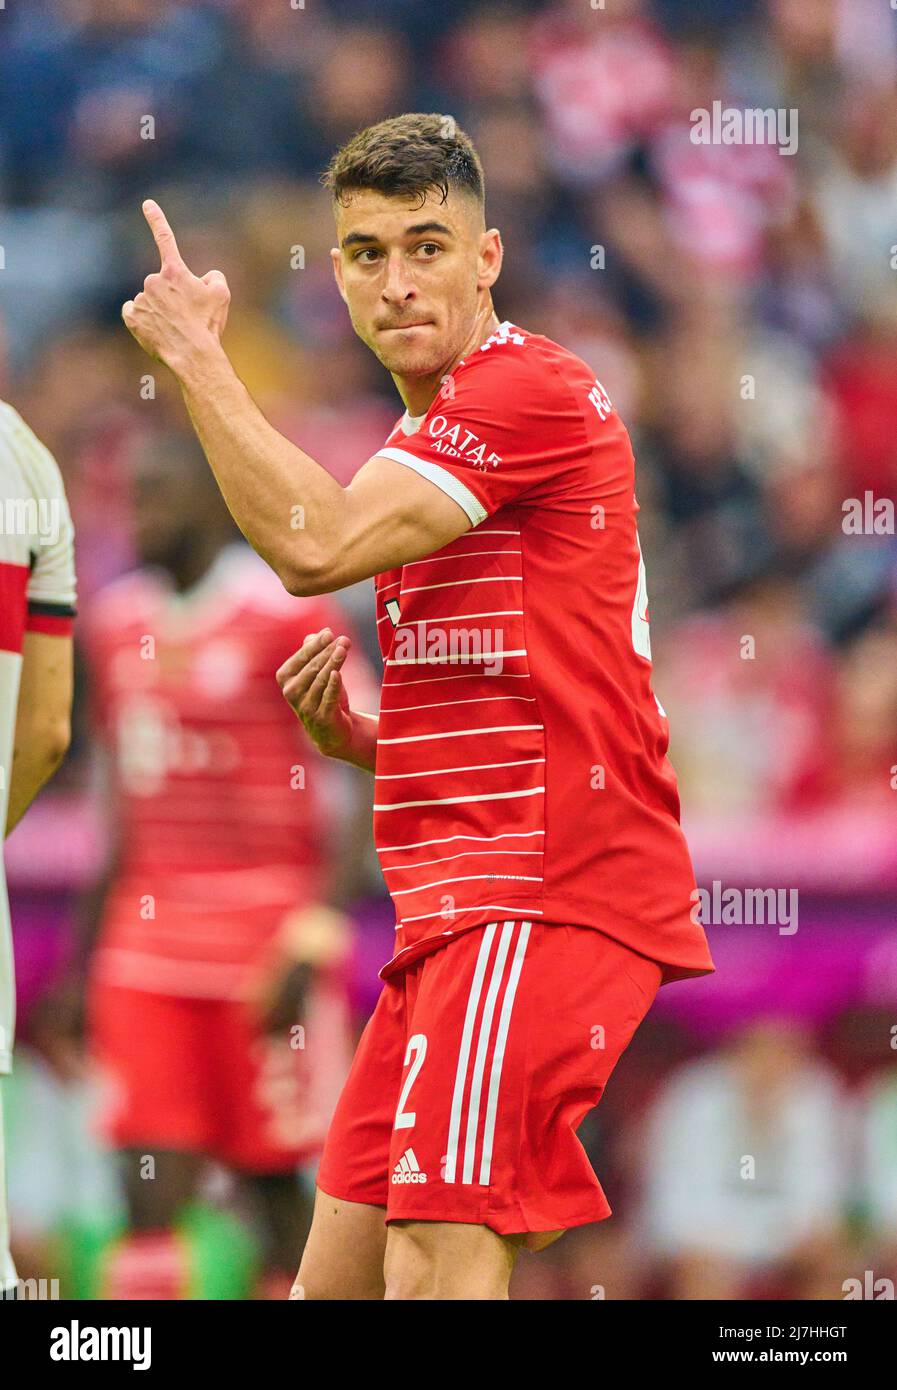 Munich, Germany, 08/05/2022, Marc ROCA, FCB 22  in the match FC BAYERN MÜNCHEN - VFB STUTTGART 2-2 1.German Football League on Mai 08, 2022 in Munich, Germany. Season 2021/2022, match day 33, 1.Bundesliga, Muenchen, 33.Spieltag. FCB, © Peter Schatz / Alamy Live News    - DFL REGULATIONS PROHIBIT ANY USE OF PHOTOGRAPHS as IMAGE SEQUENCES and/or QUASI-VIDEO - Stock Photo